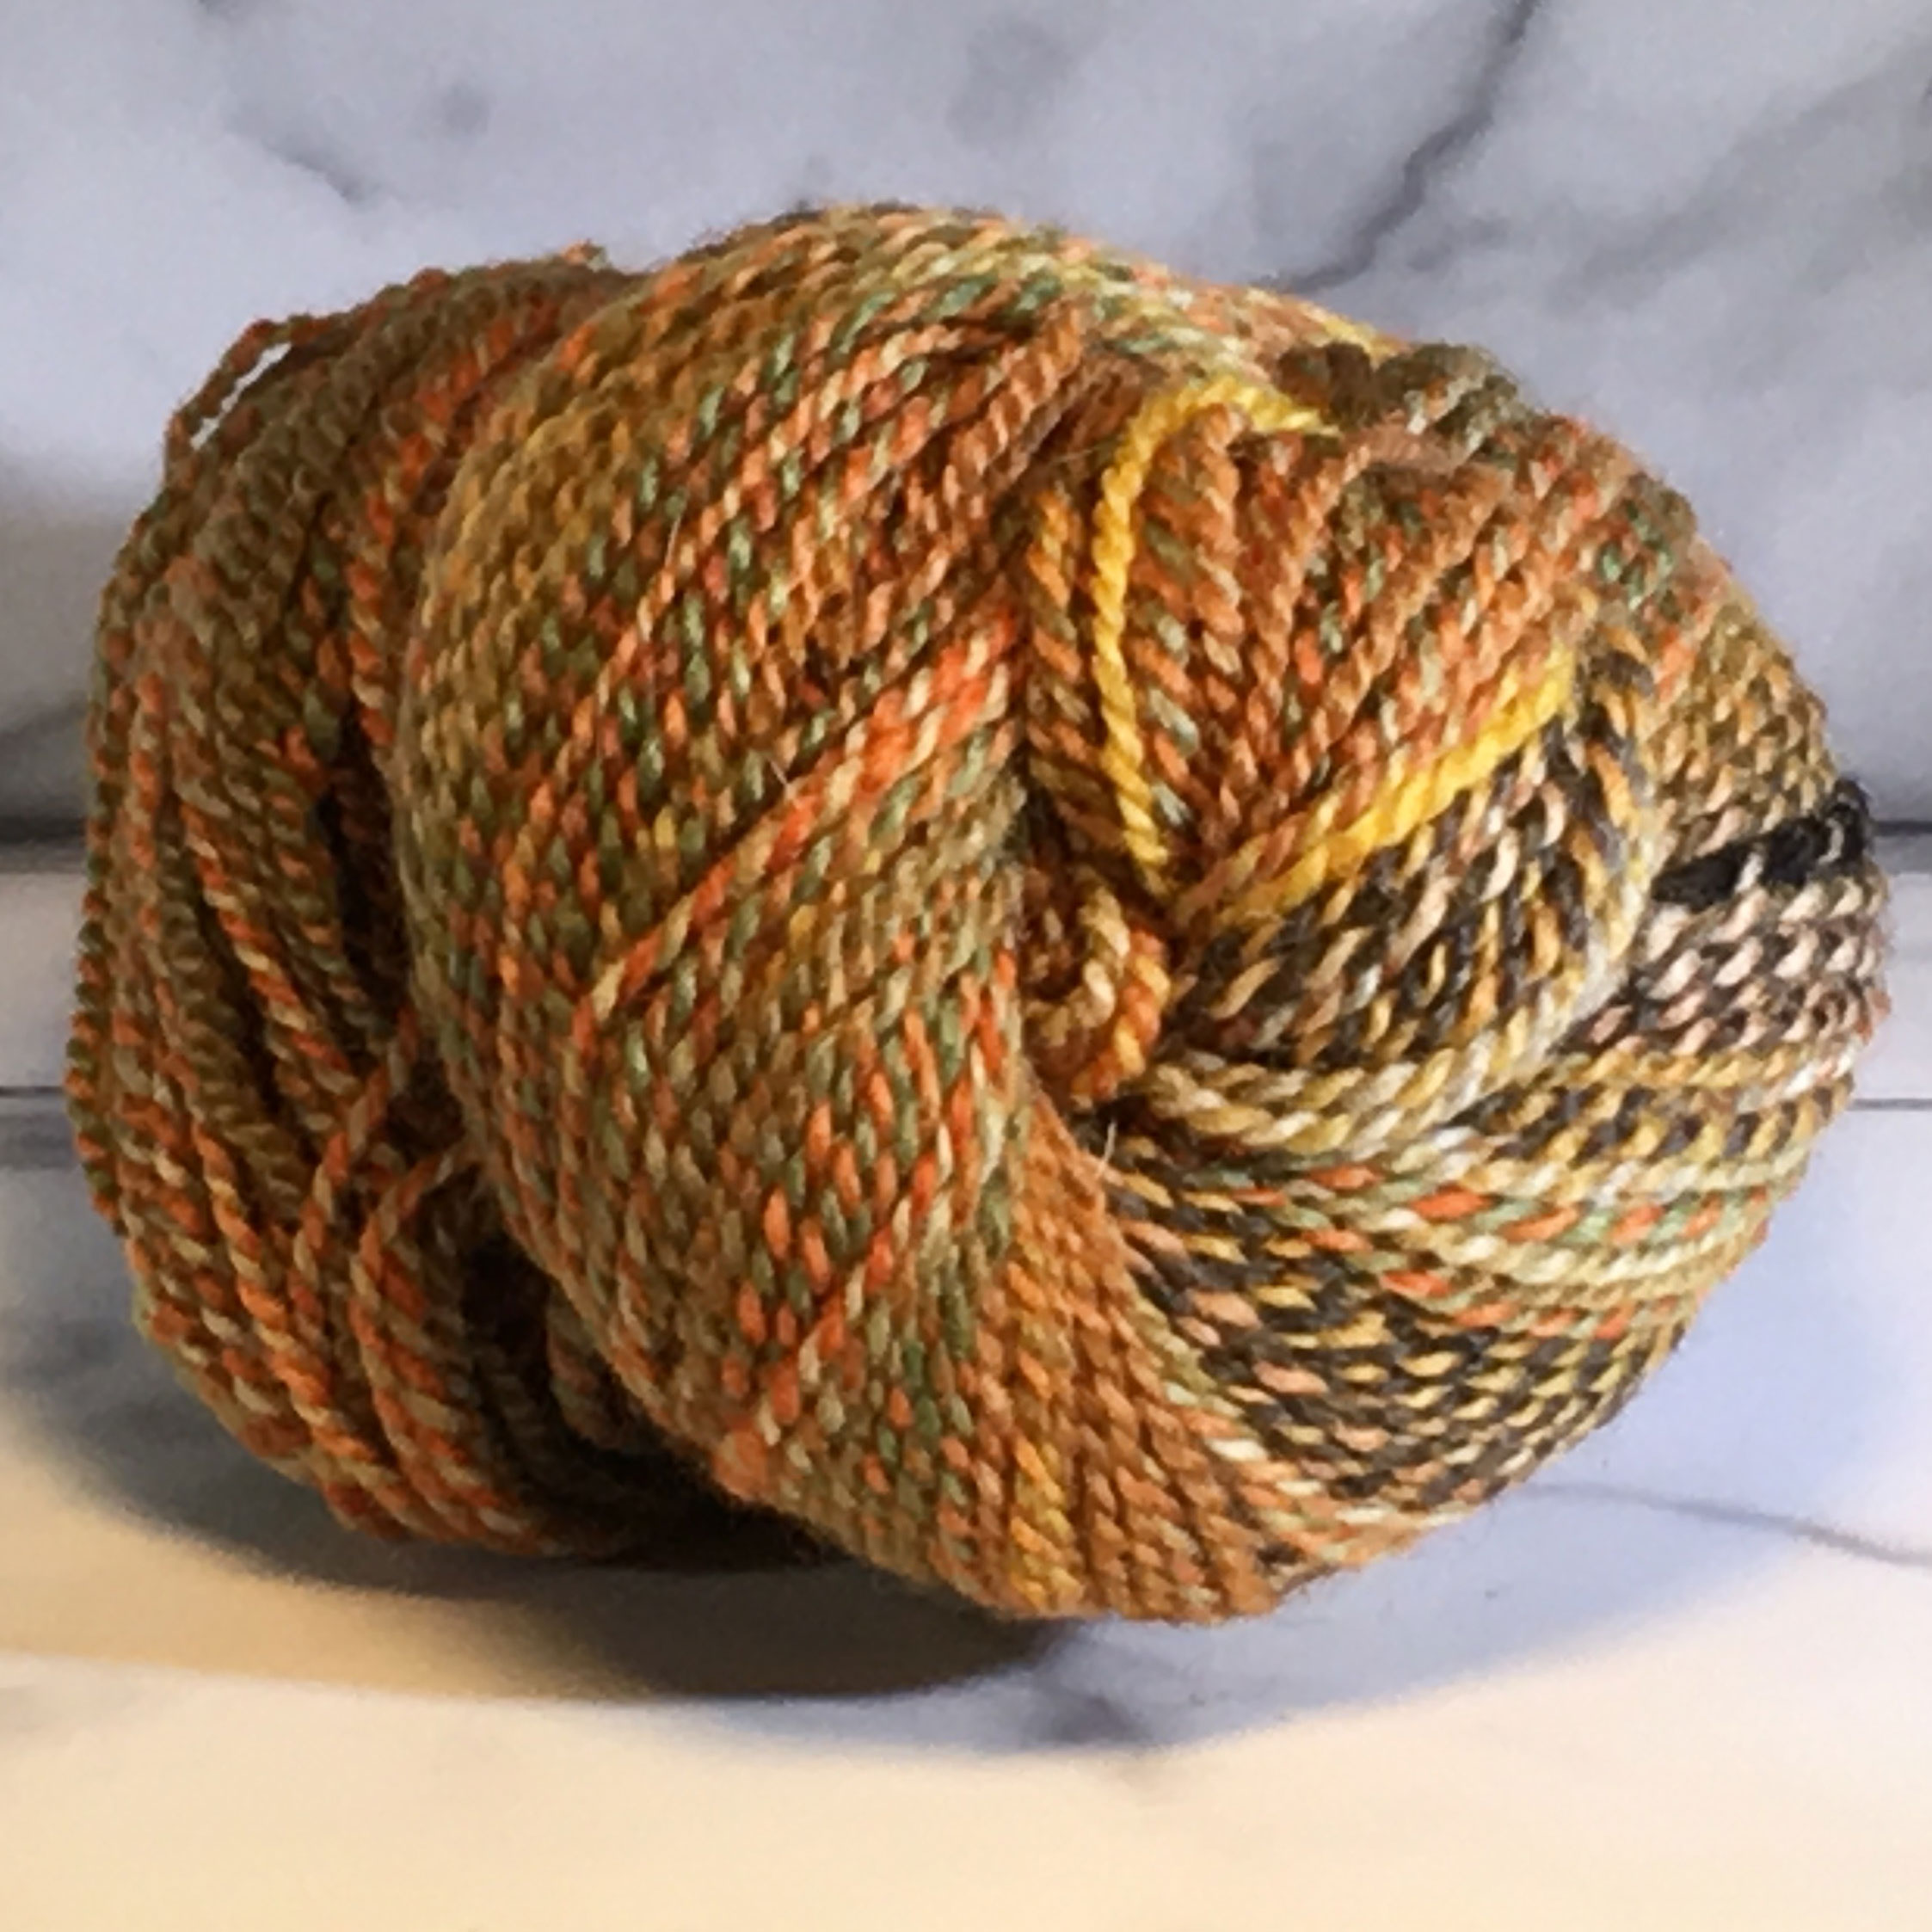 Feederbrook Farms Entropy DK100% Bluefaced Leicester WoolKinetic Energy</strong>. (Copy)